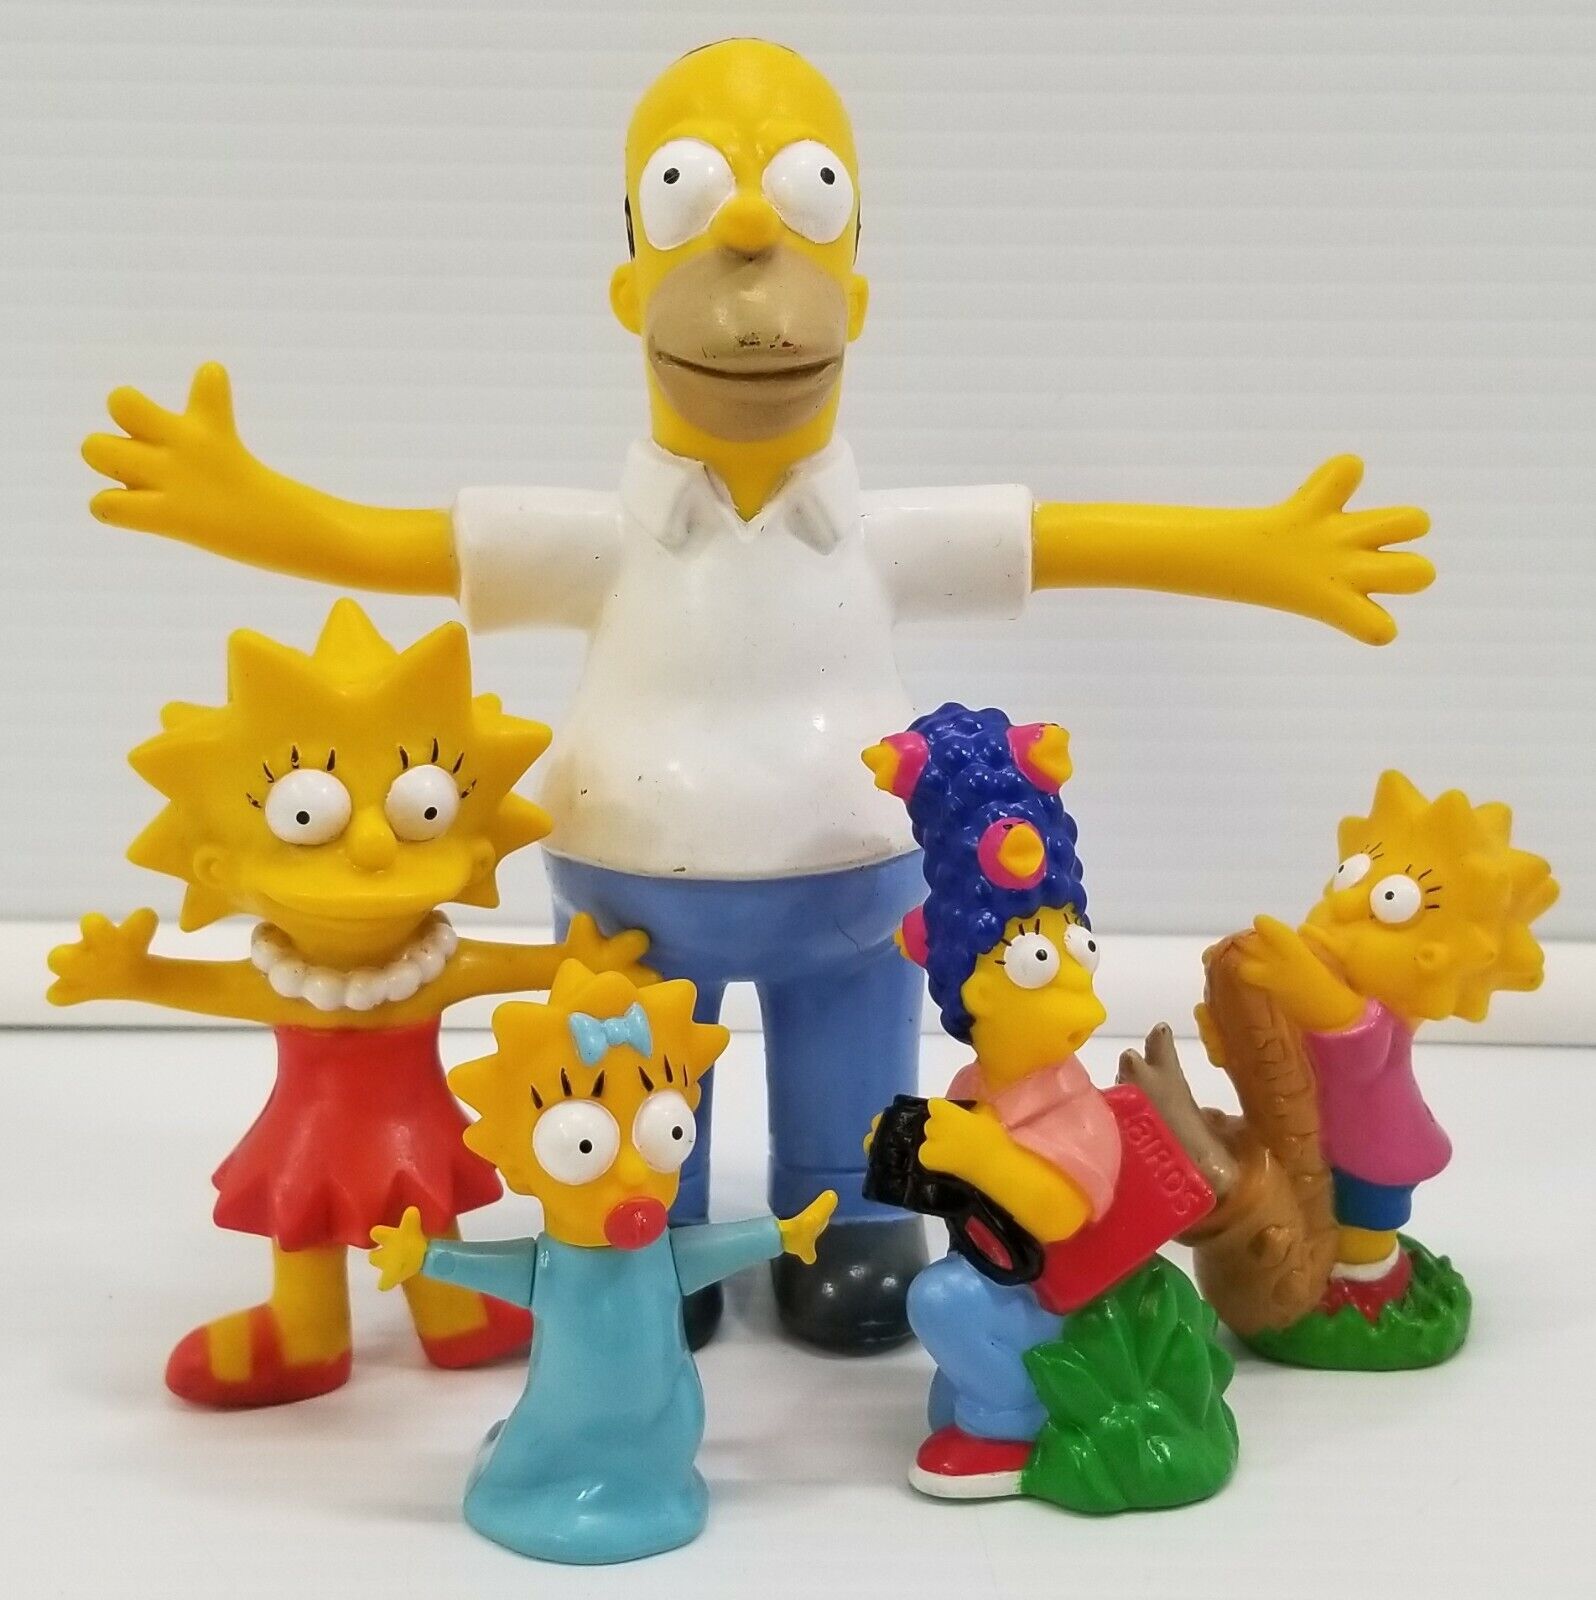 N) Lot of 5 The Simpsons Toy Figures Jesco Burger King Homer Marge Lisa Maggie